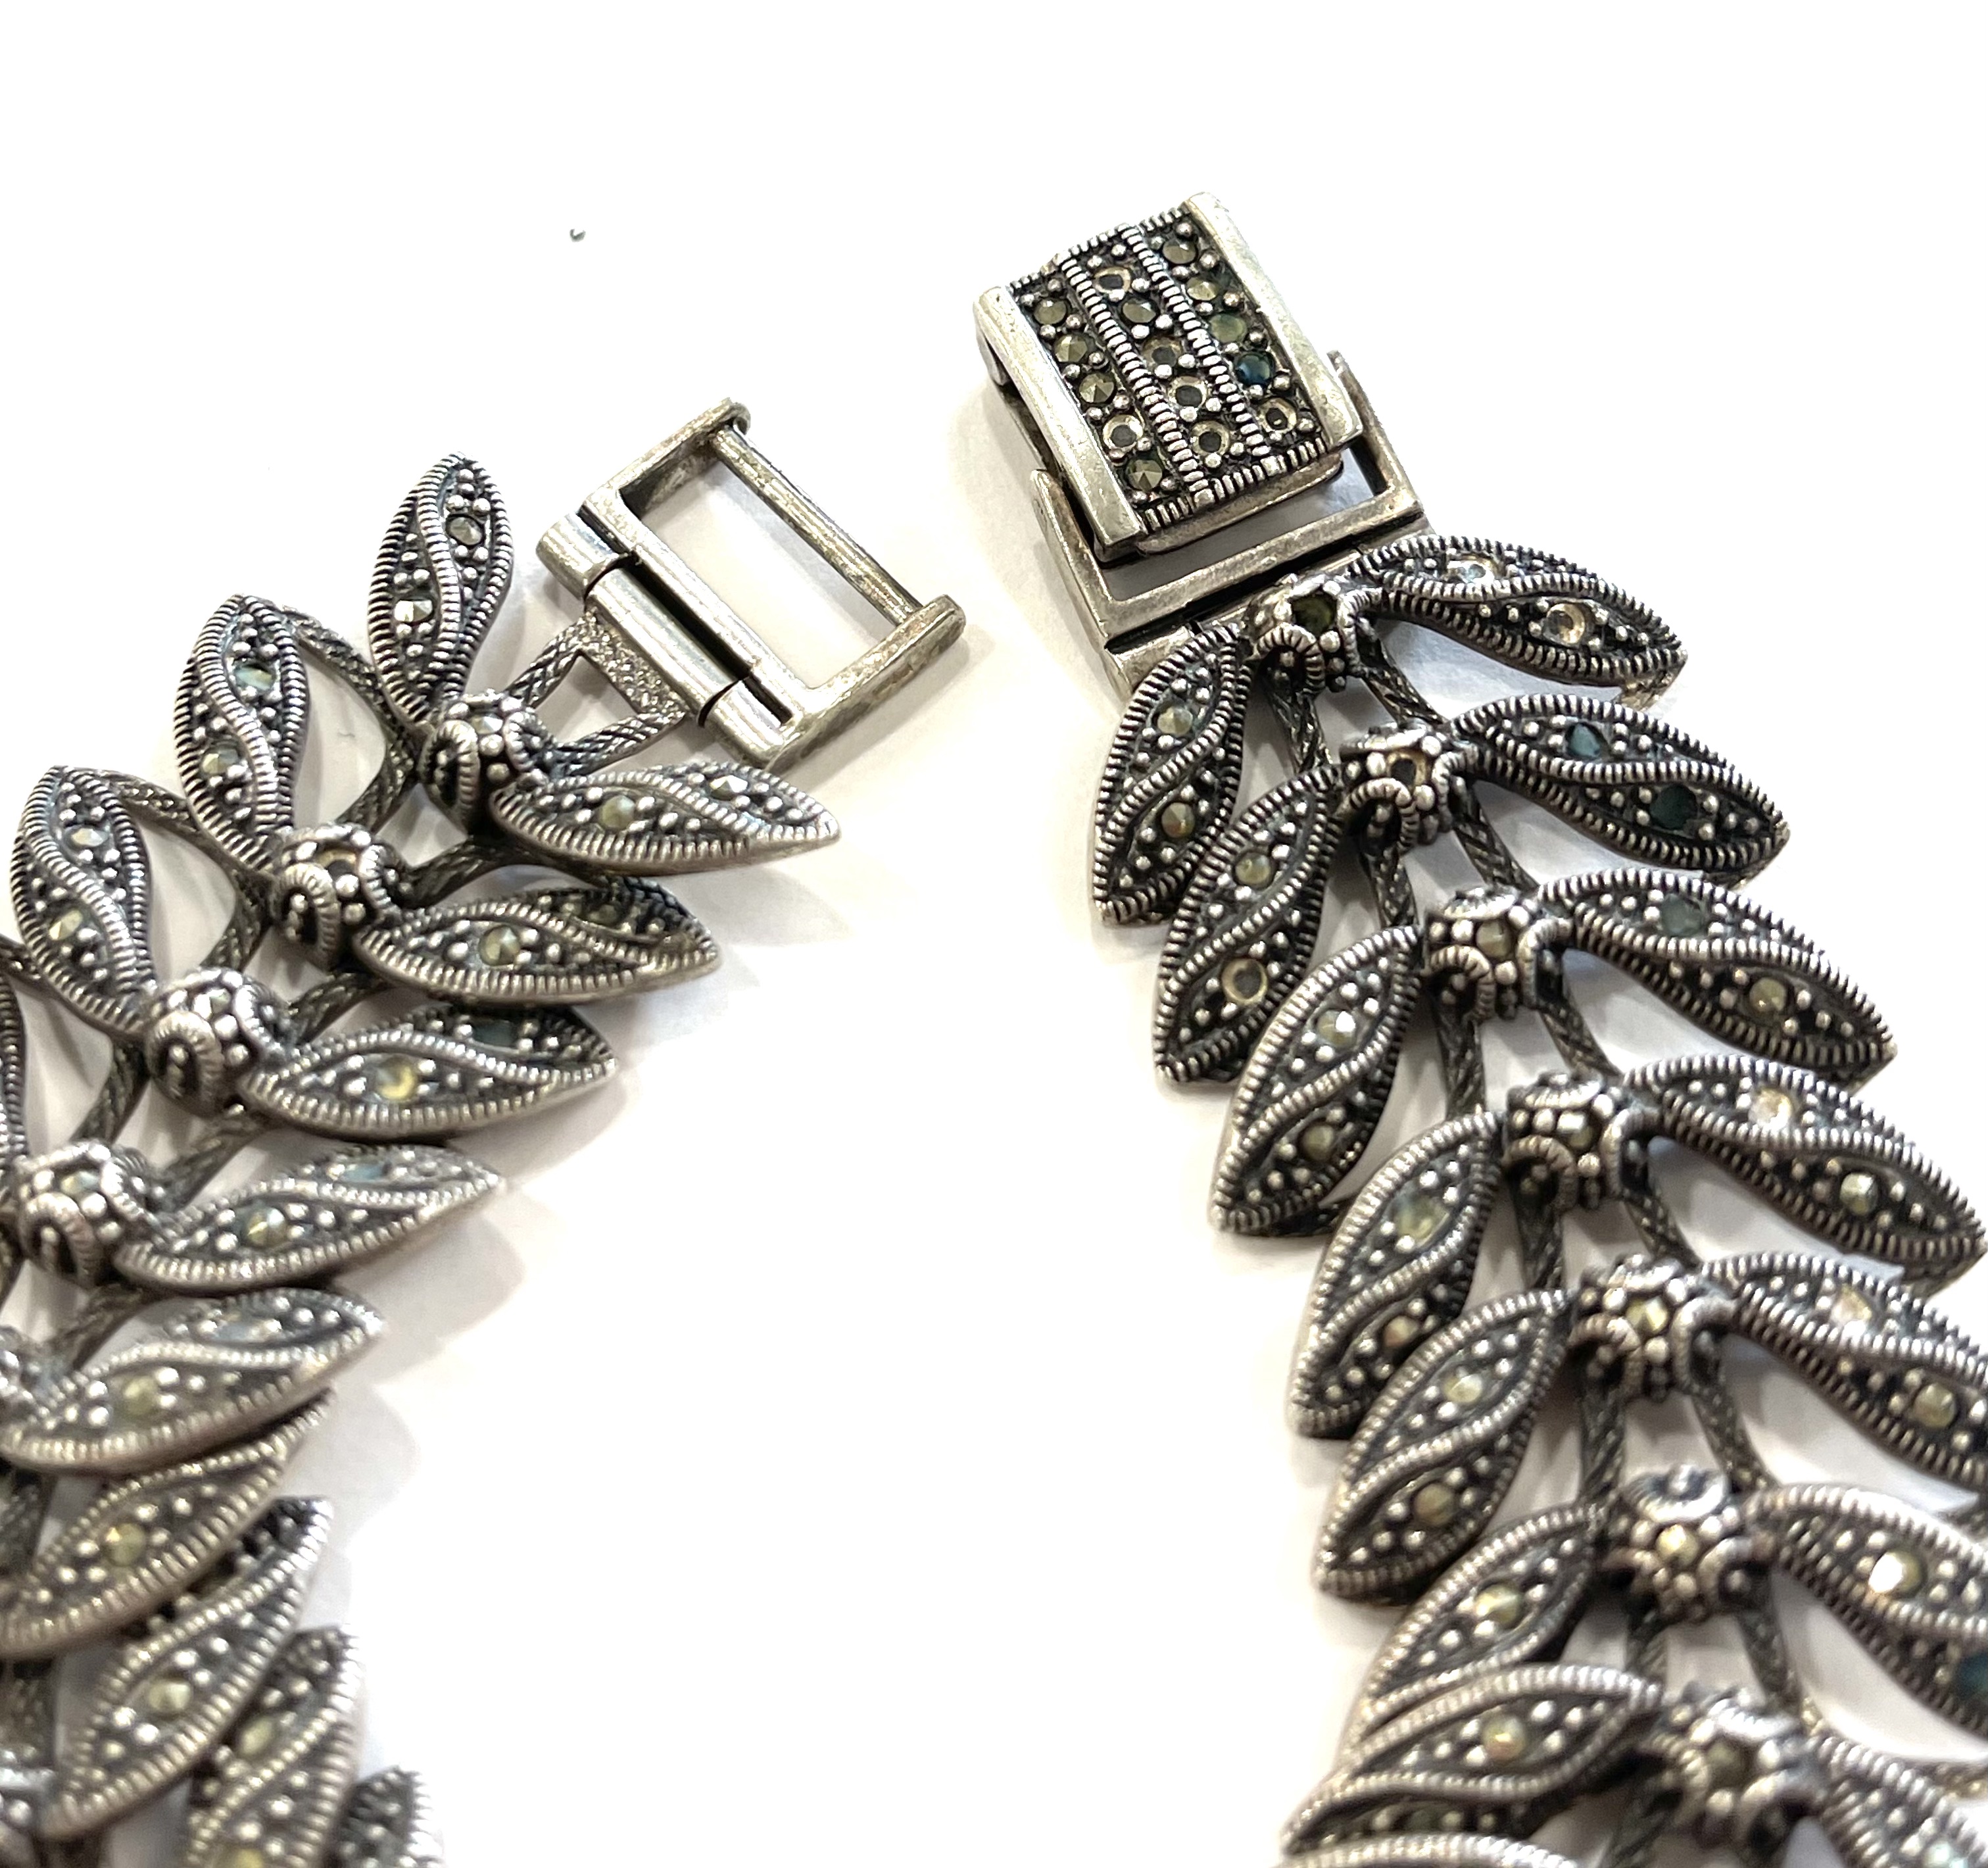 Vintage silver and marcasite bracelet missing some marcasite stones hallmarked 925 weight 45g - Image 2 of 3